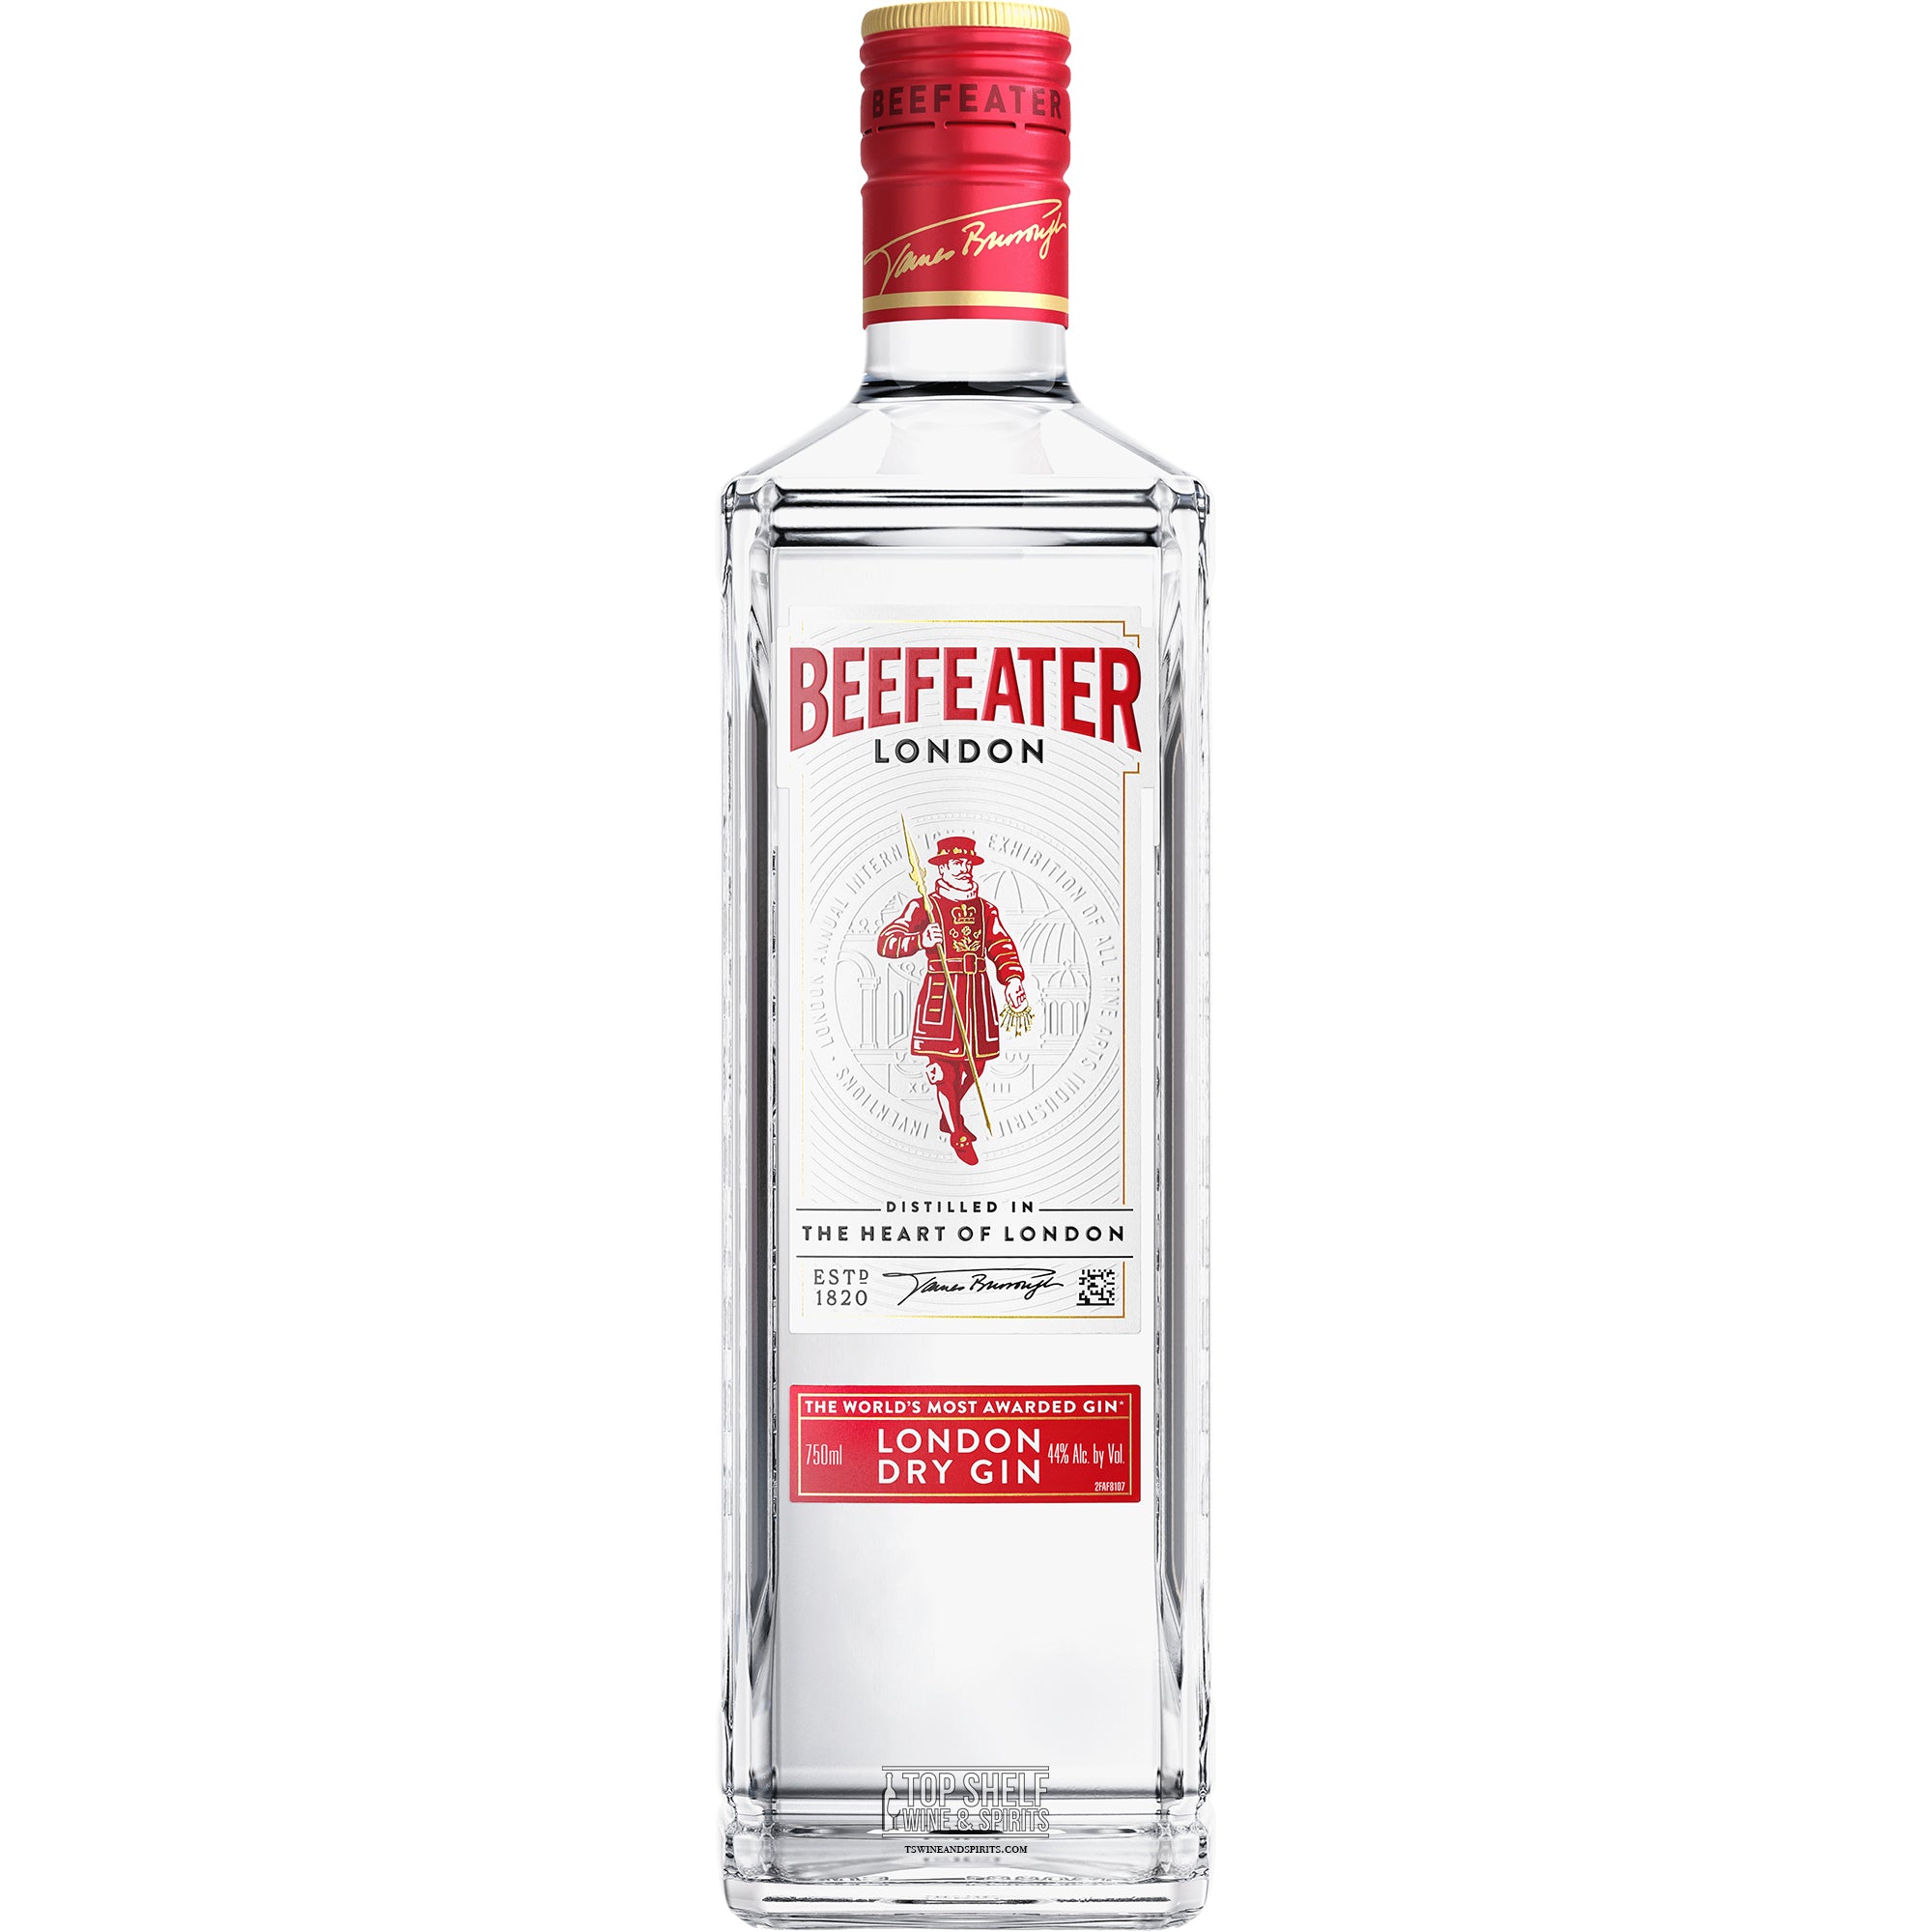 Beefeater London Gifting | Free) Dry & (Gluten Delivery Gin